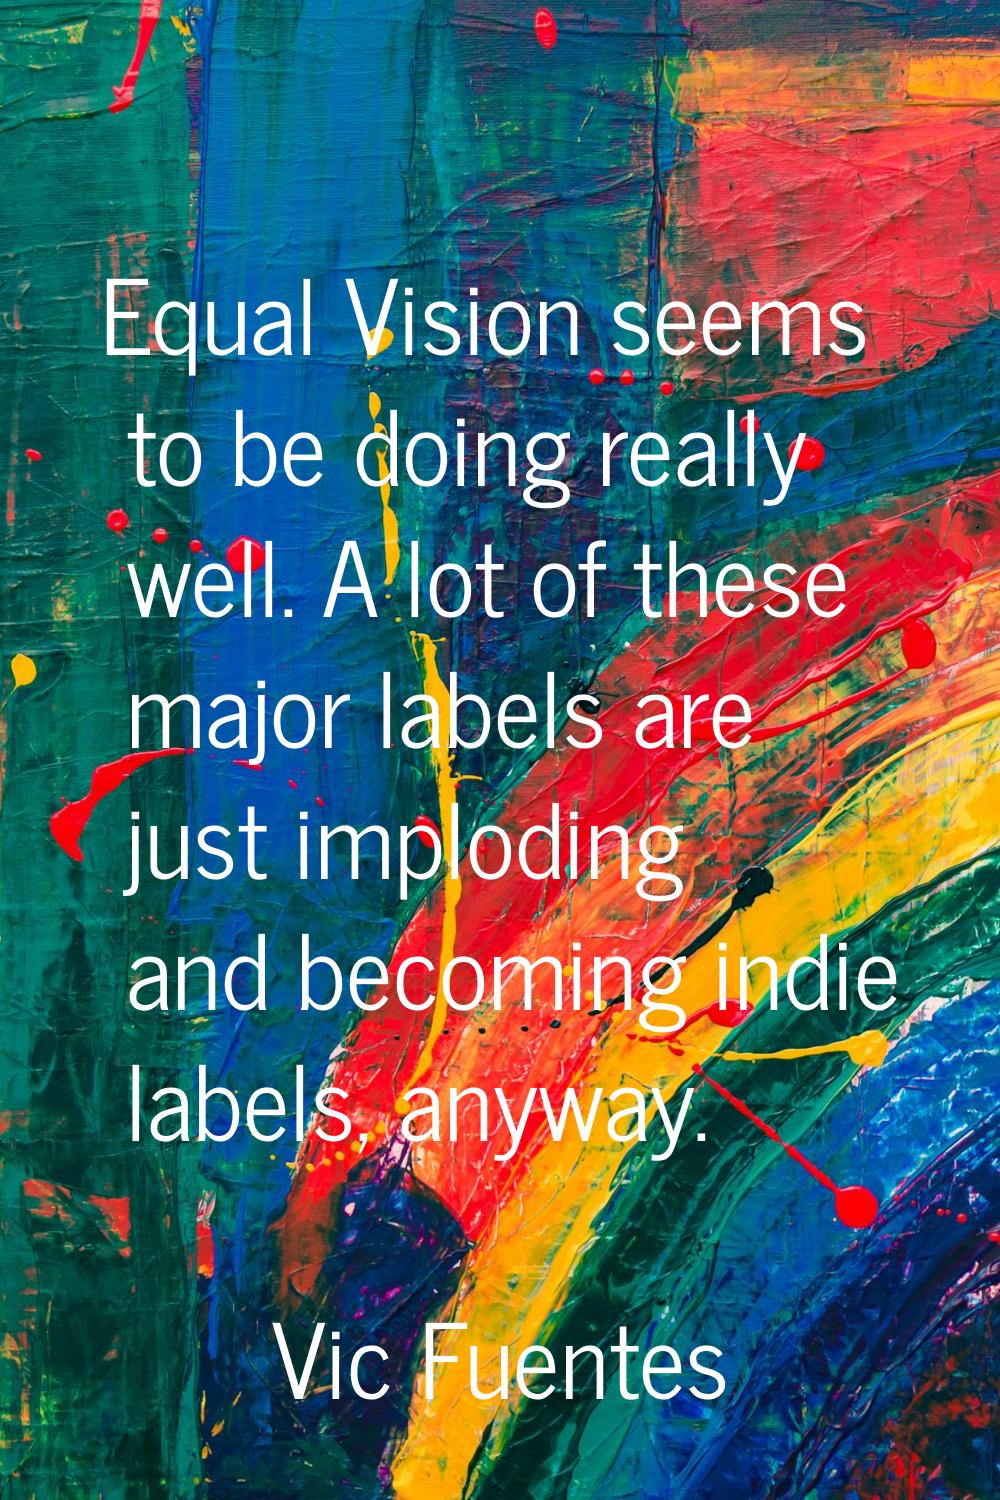 Equal Vision seems to be doing really well. A lot of these major labels are just imploding and beco